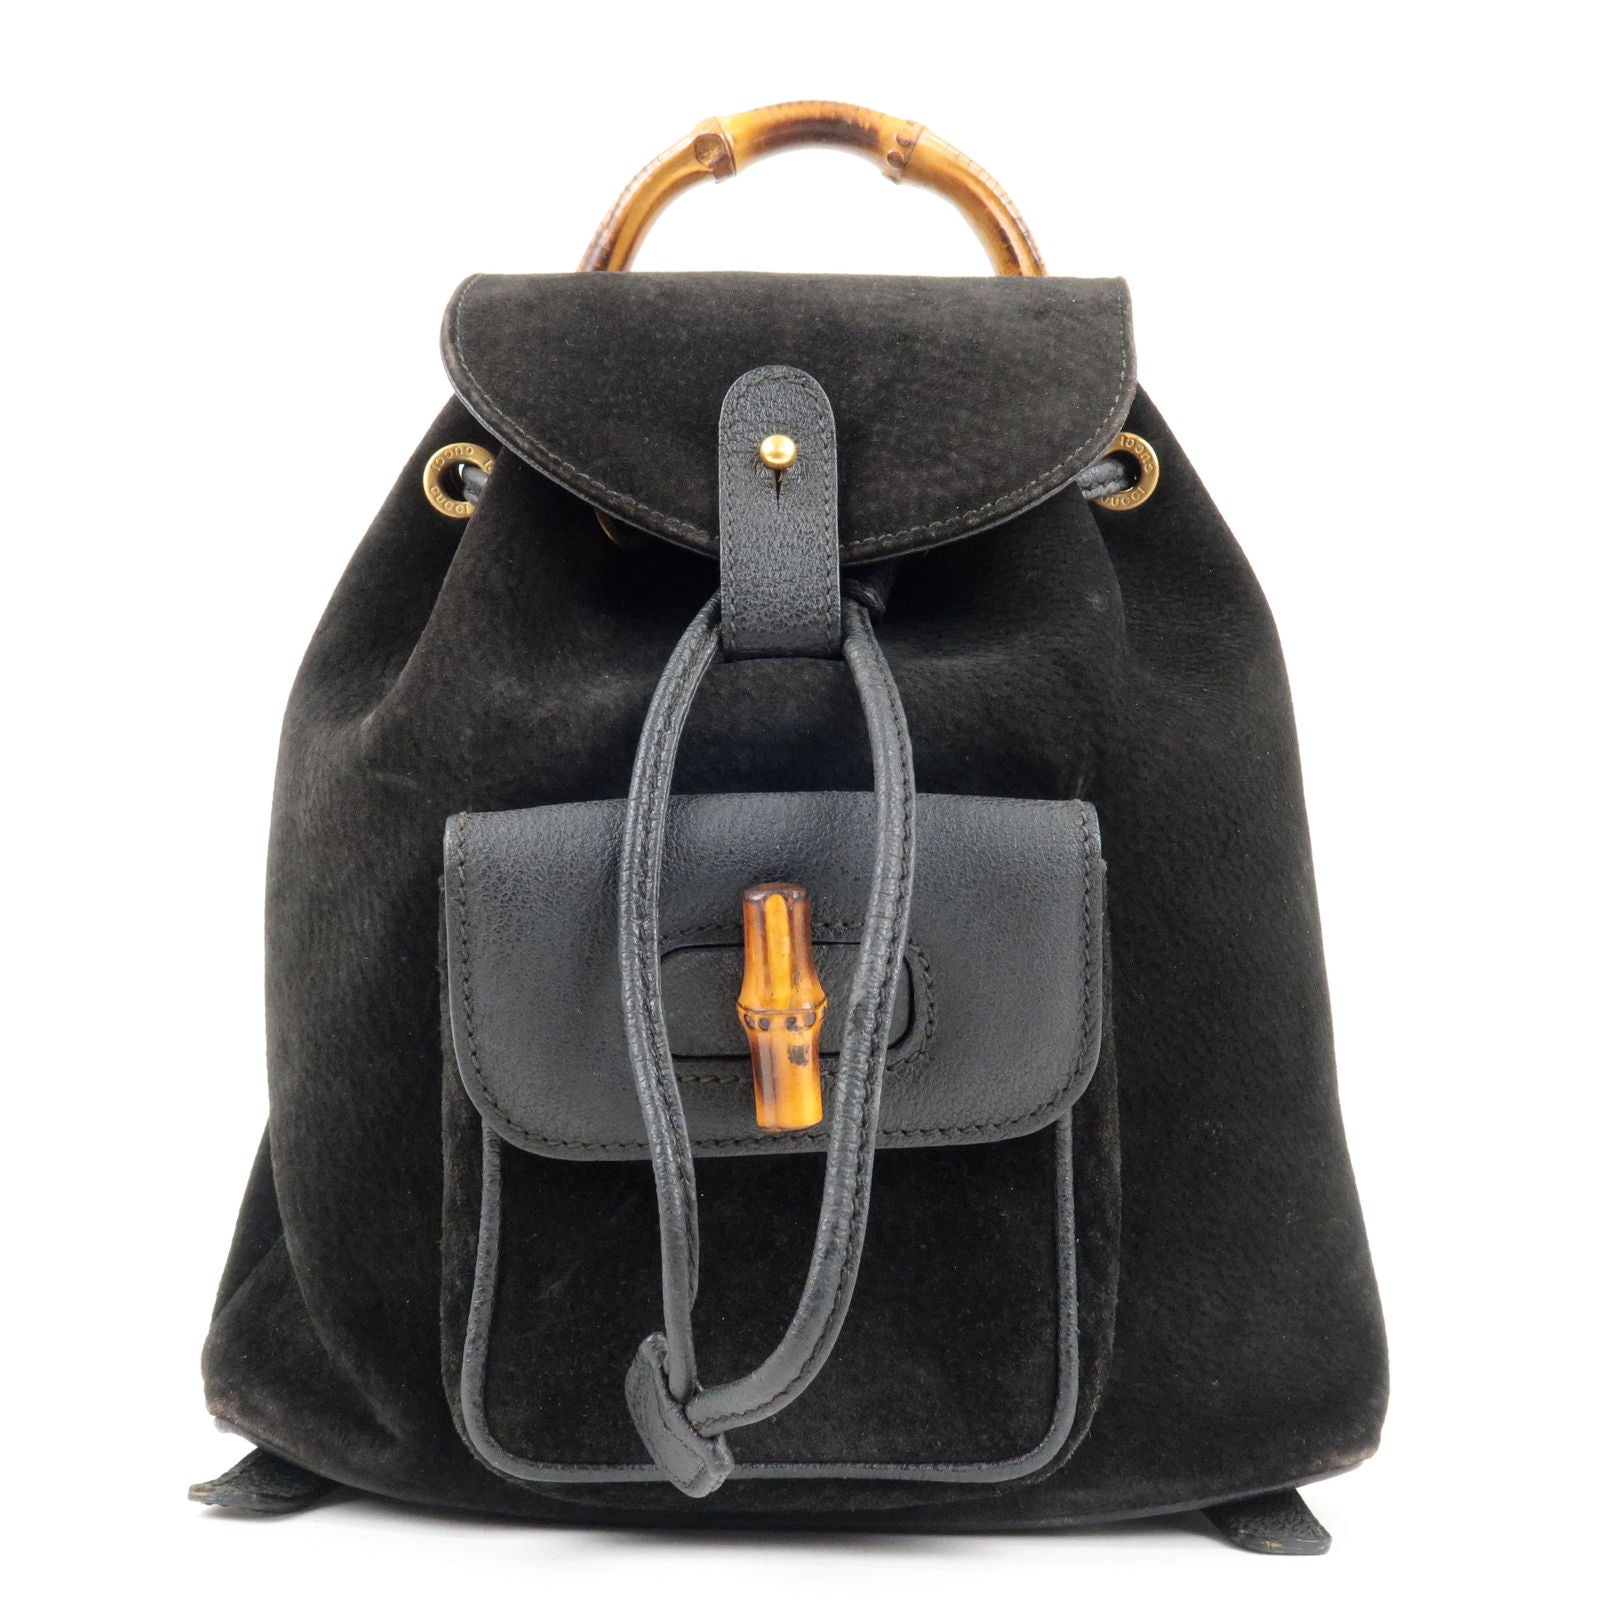 GUCCI-Bamboo-Suede-Leather-Ruck-Sack-Back-Pack-Black-003.2058.0030